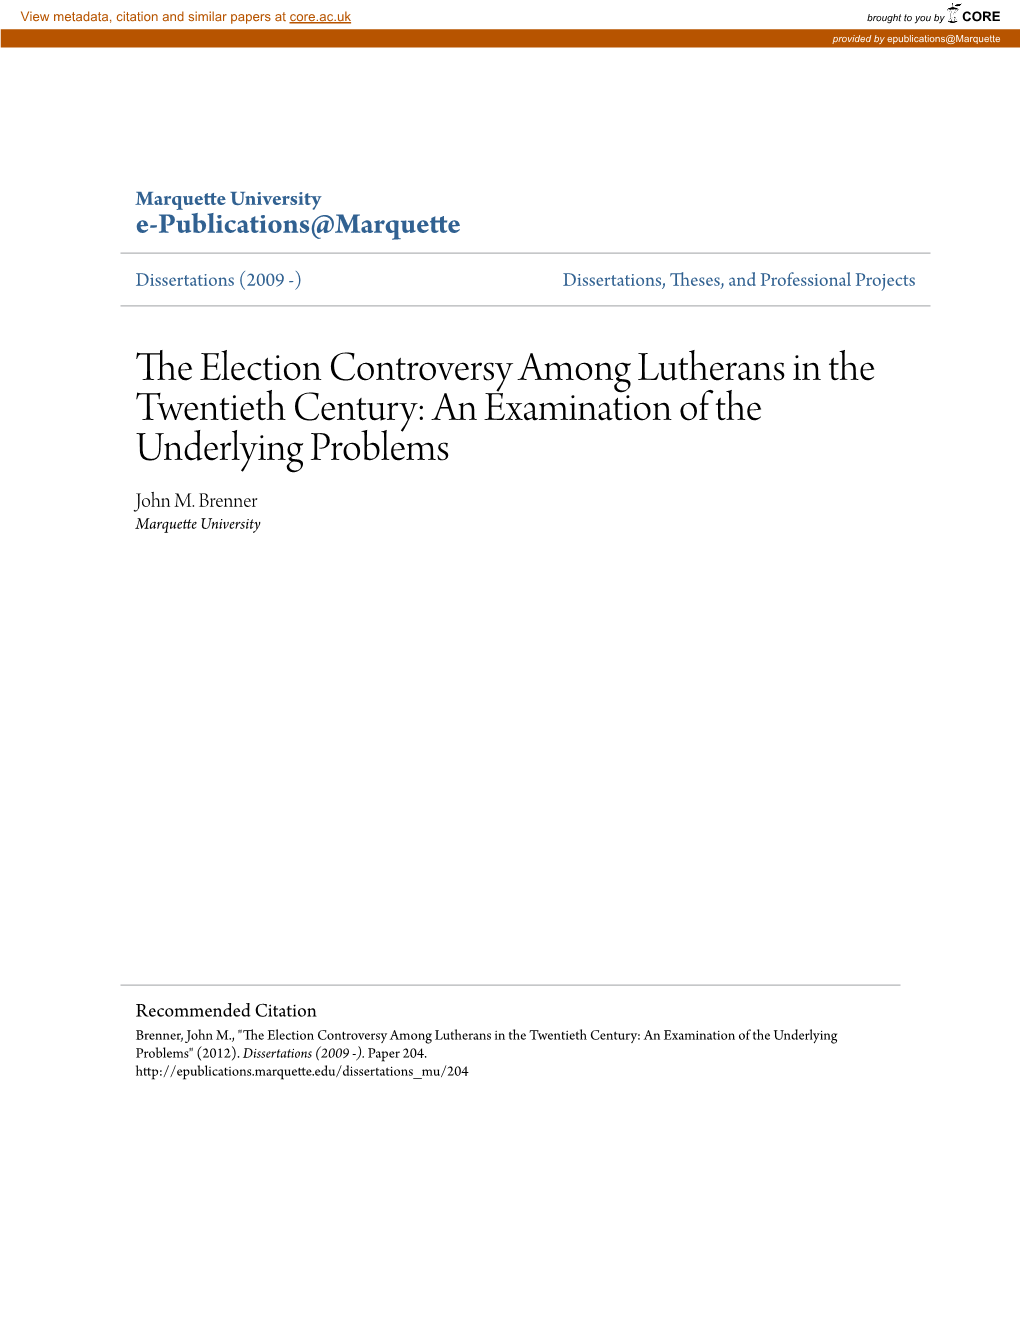 The Election Controversy Among Lutherans in the Twentieth Century: an Examination of the Underlying Problems" (2012)